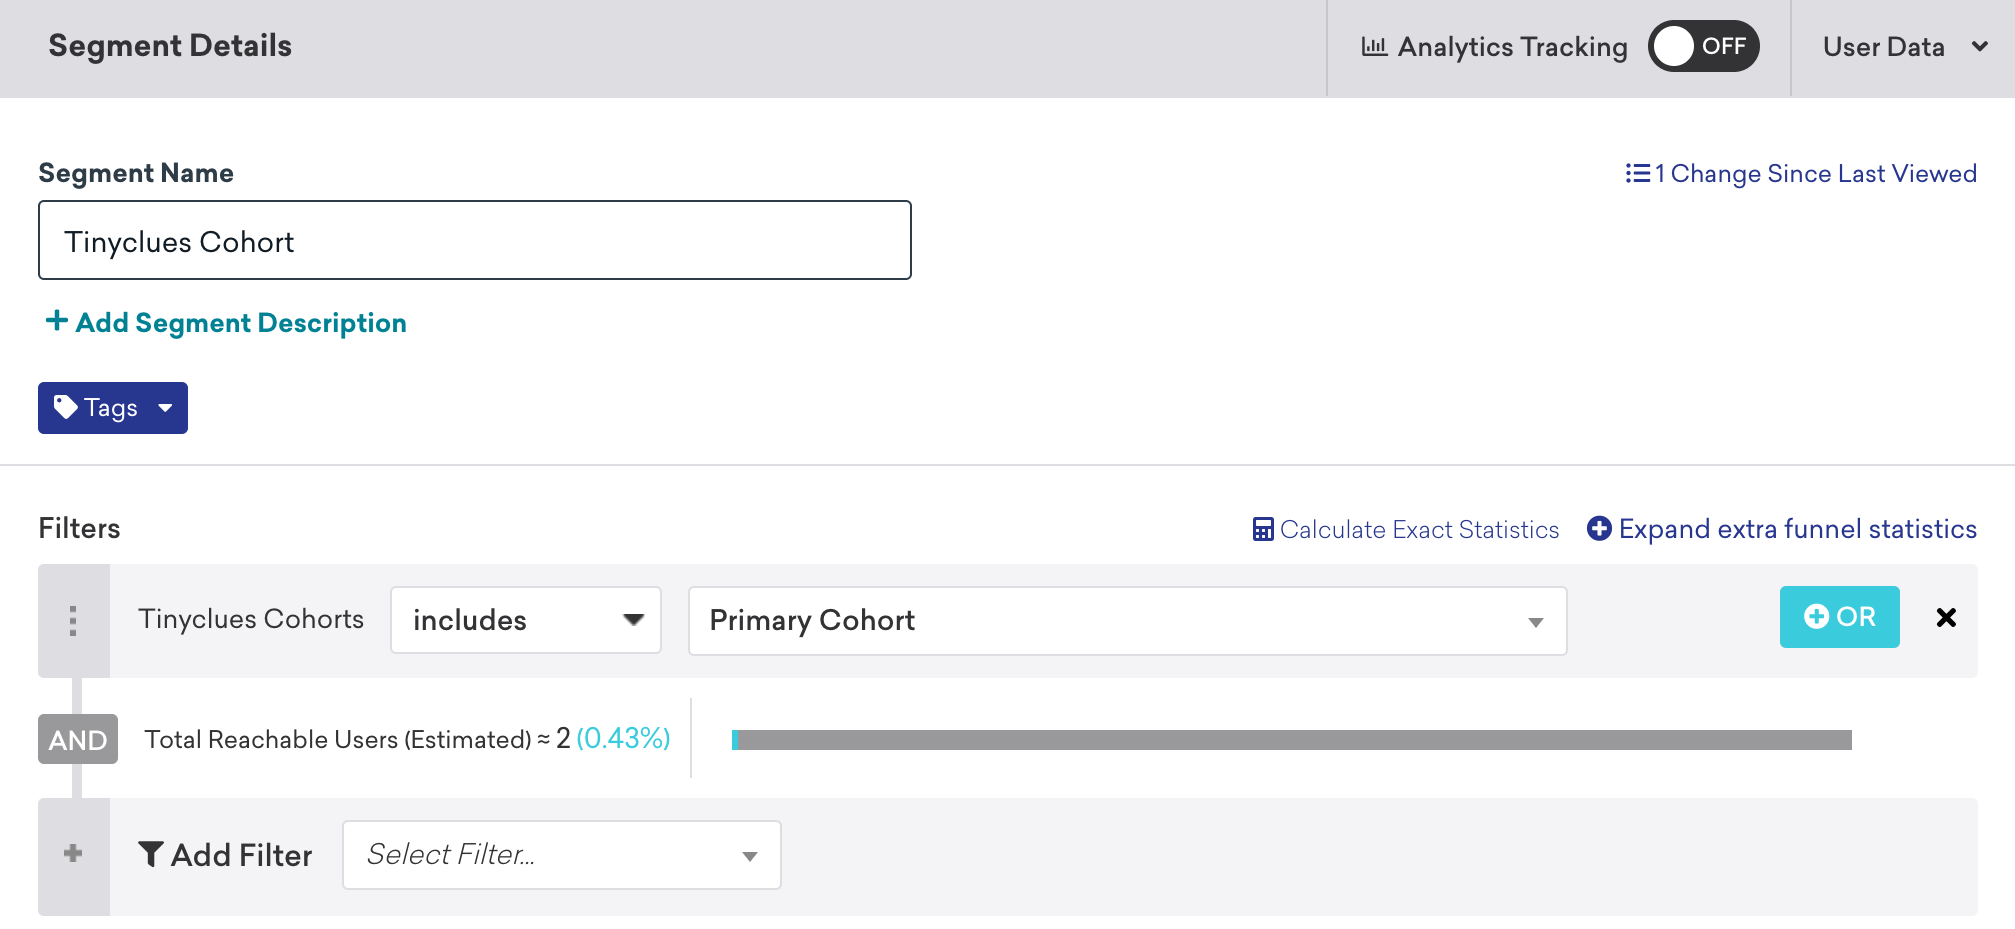 In the Braze segment builder, the user attributes filter "Tinyclues cohort" is set to "includes" and "Primary cohort".